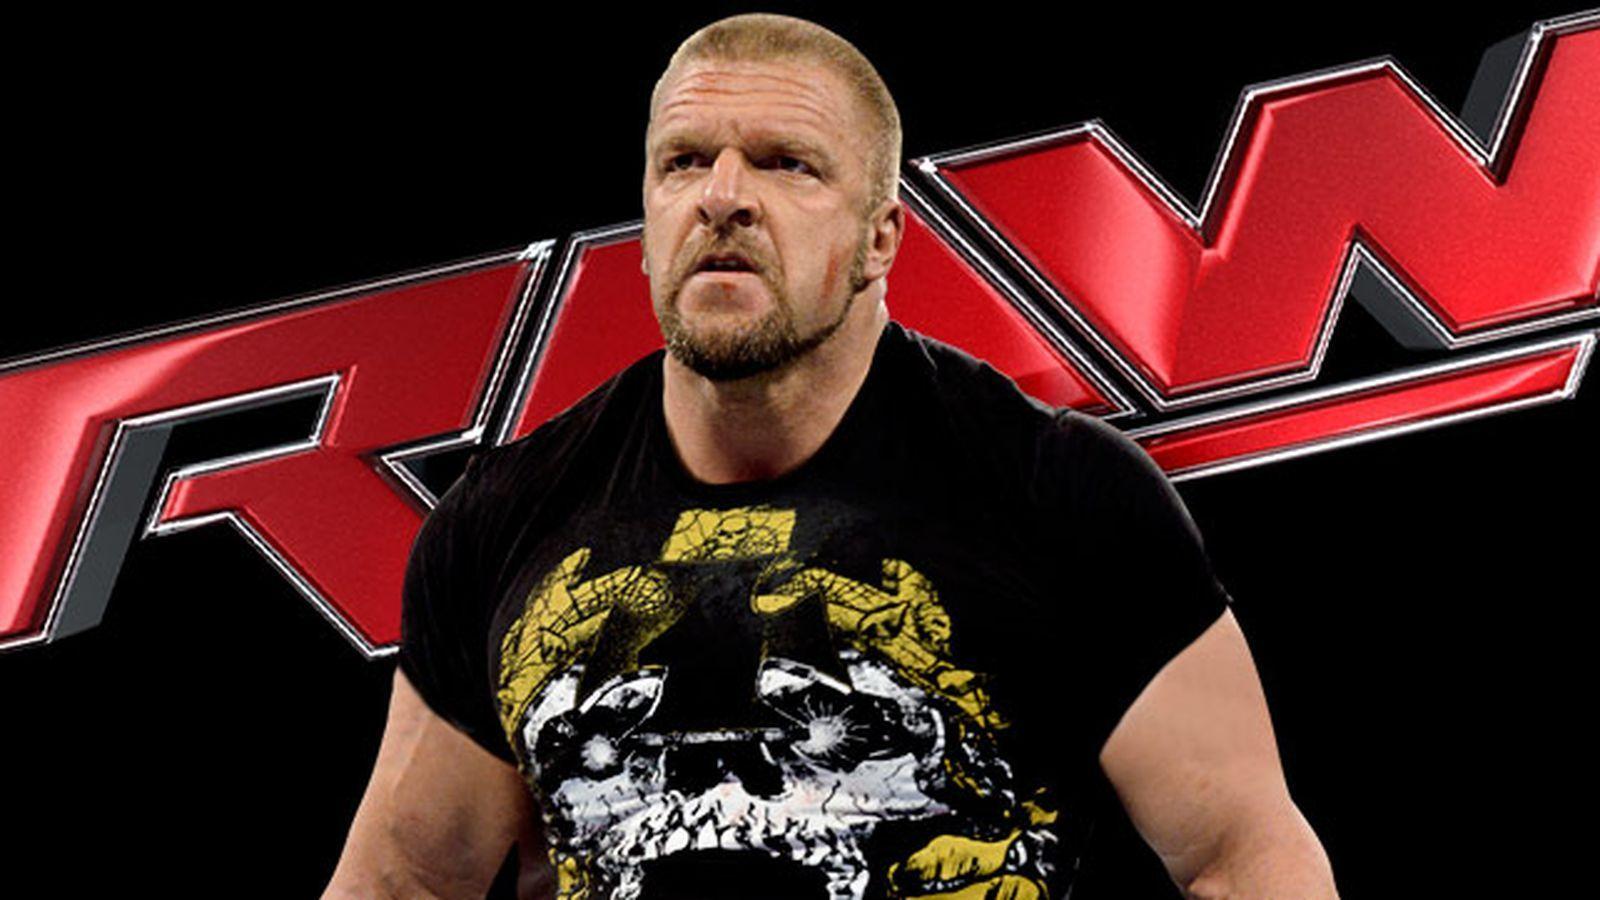 WWE Monday Night Raw results and live blog for March 18: Triple H